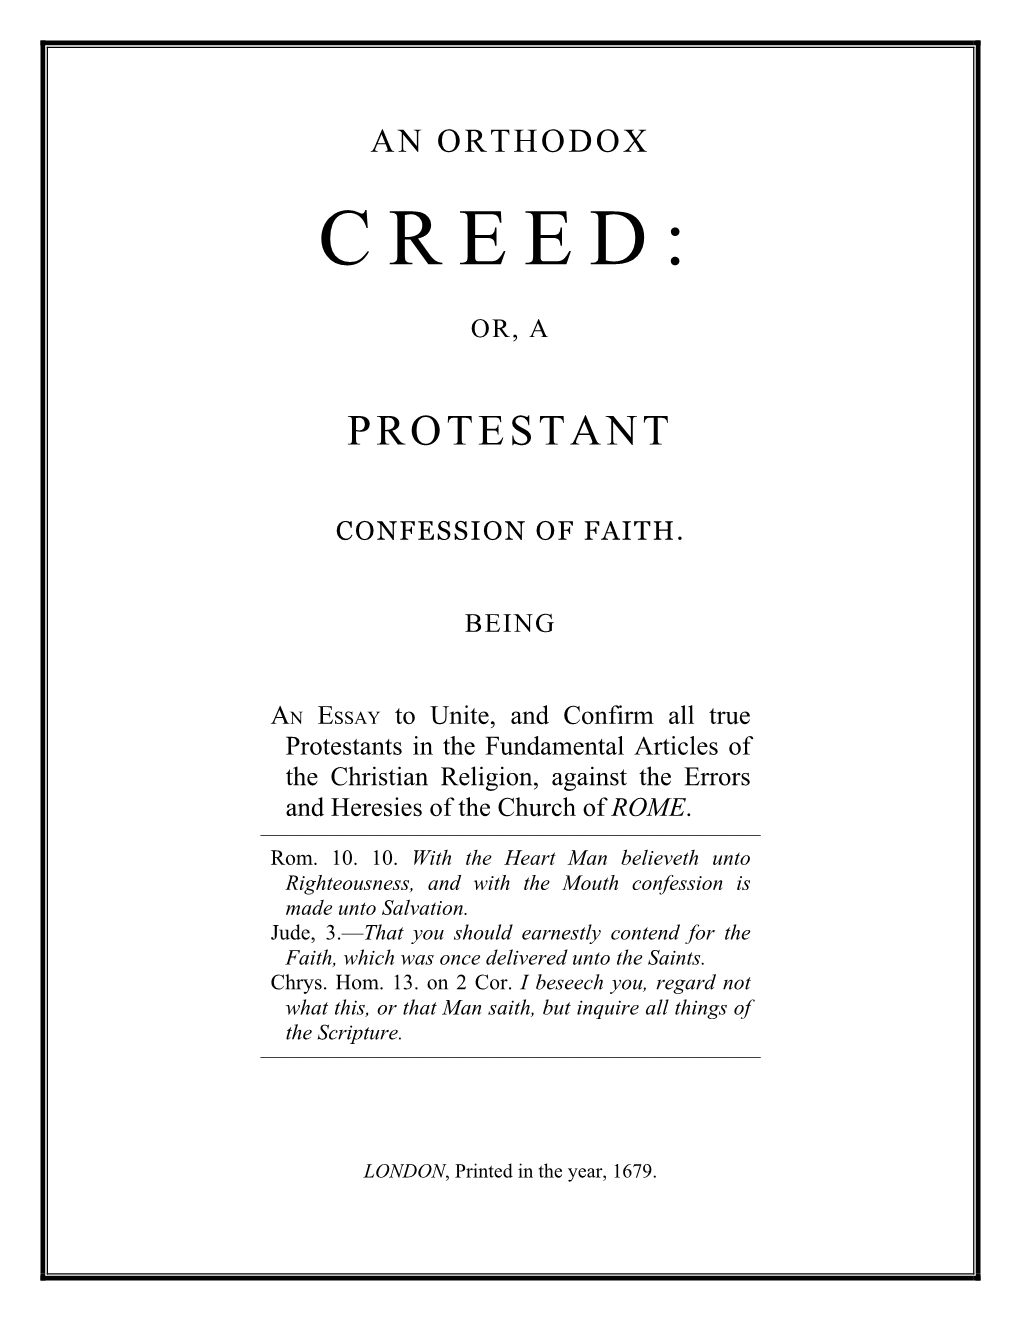 The Orthodox Creed General Baptists, 1679